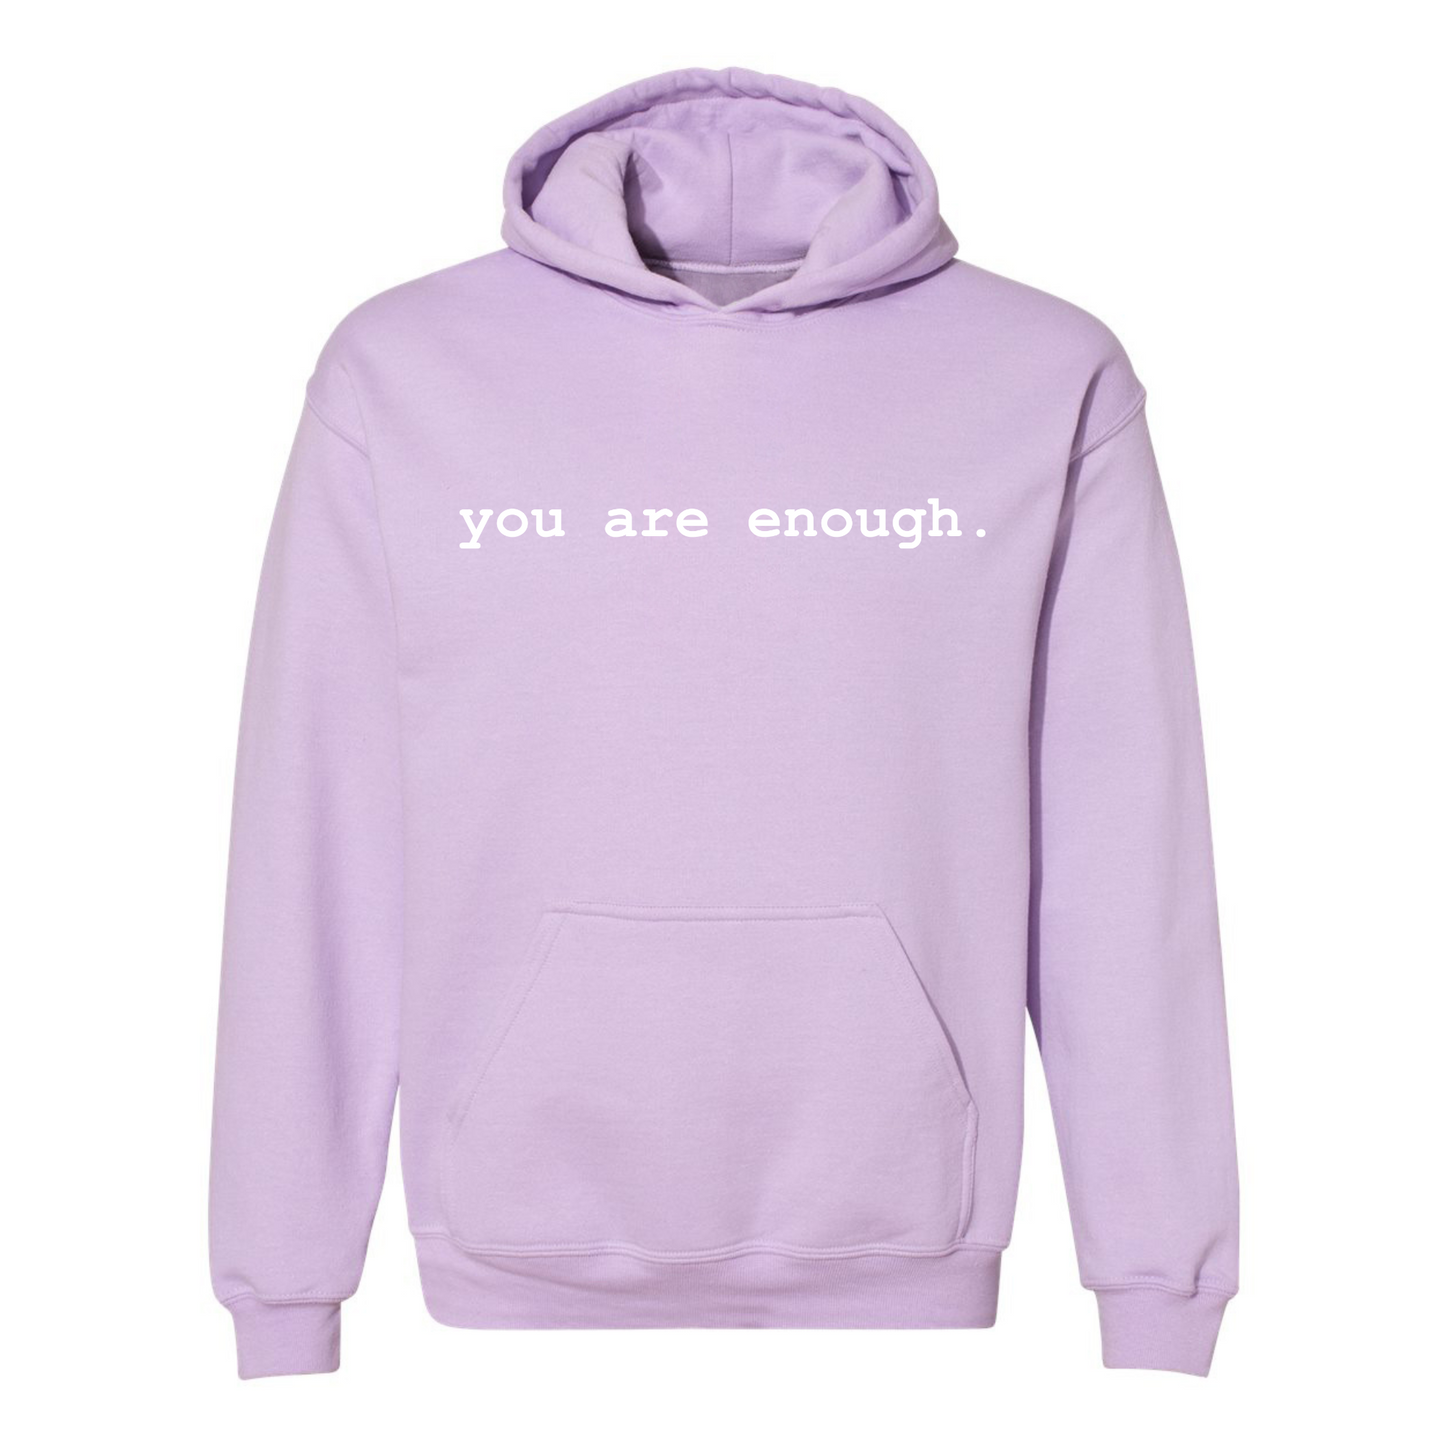 You Are Enough Hoodie - Adult Sizes